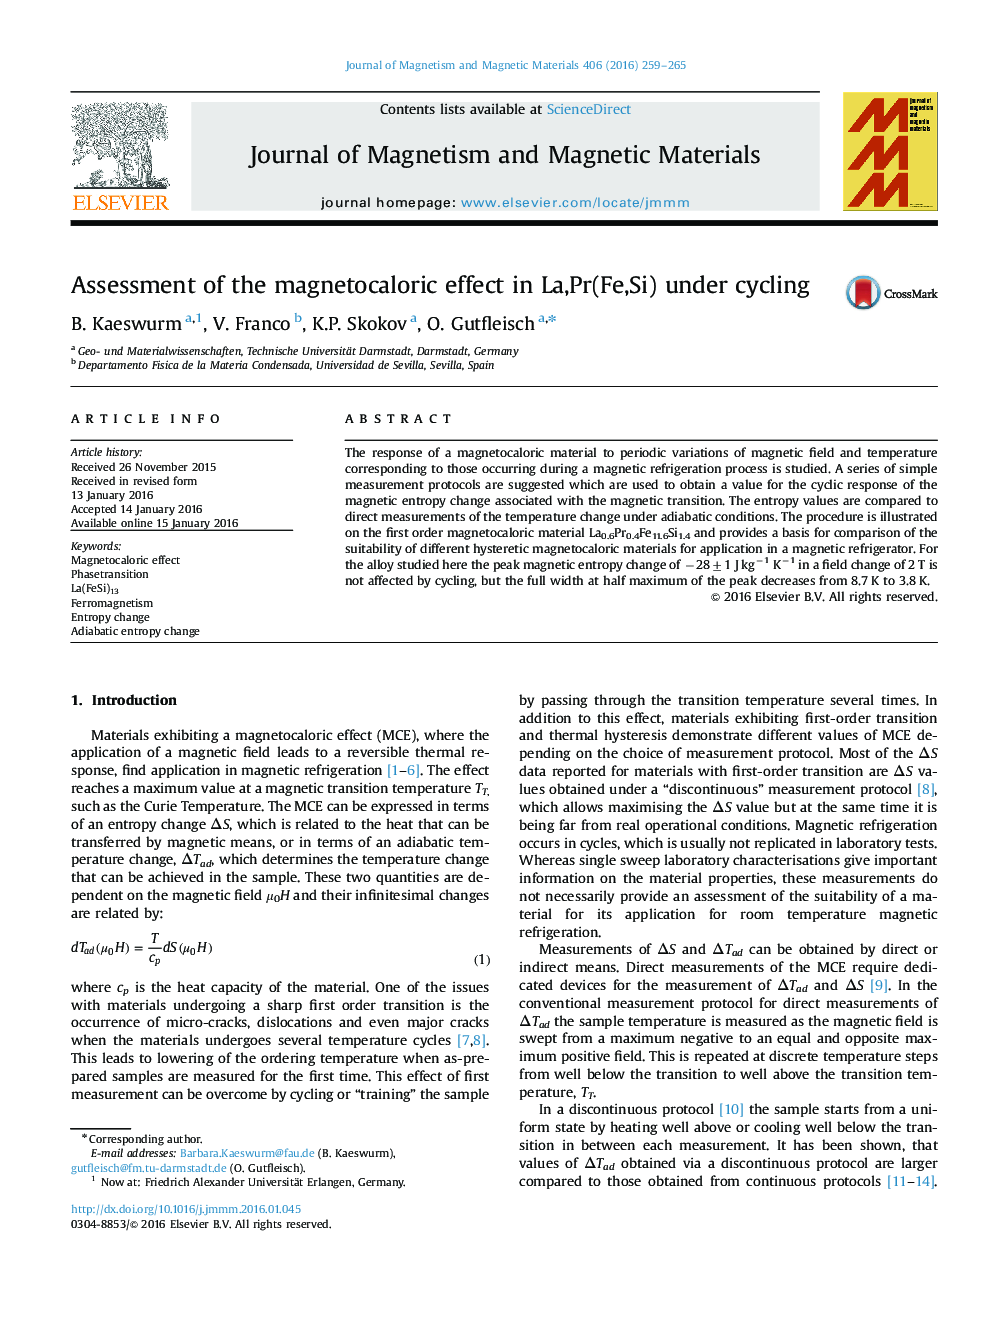 Assessment of the magnetocaloric effect in La,Pr(Fe,Si) under cycling